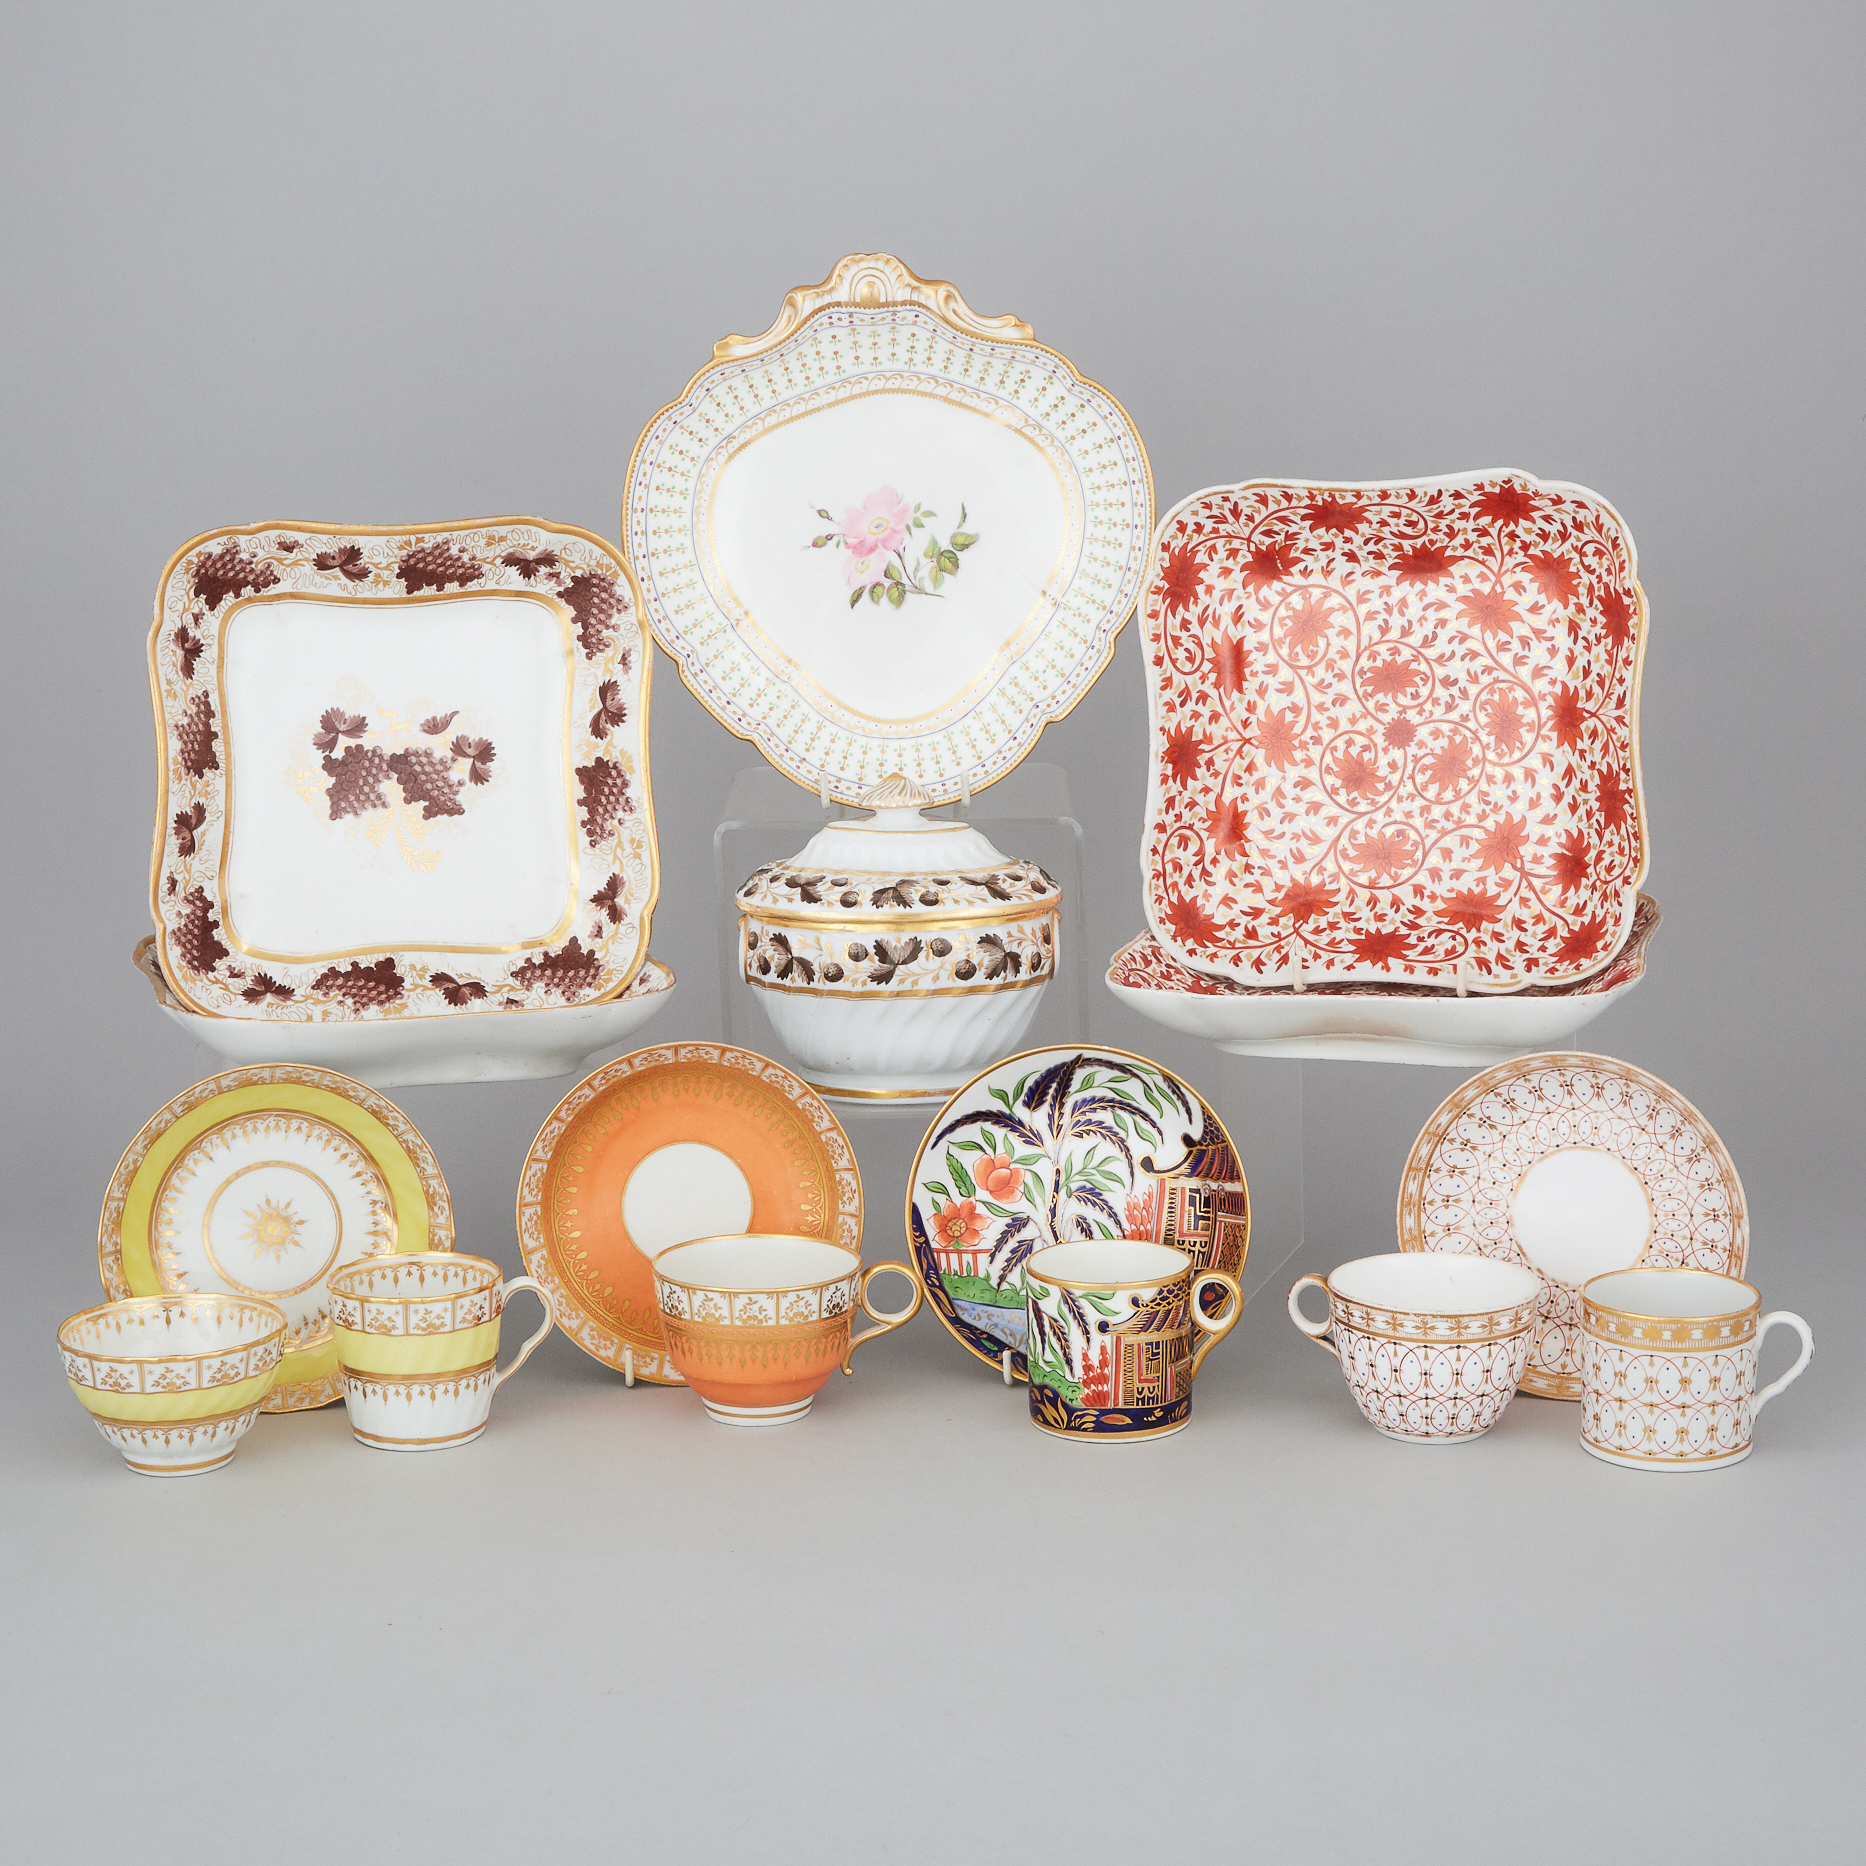 Group of English Porcelain, late 18th/early 19th century